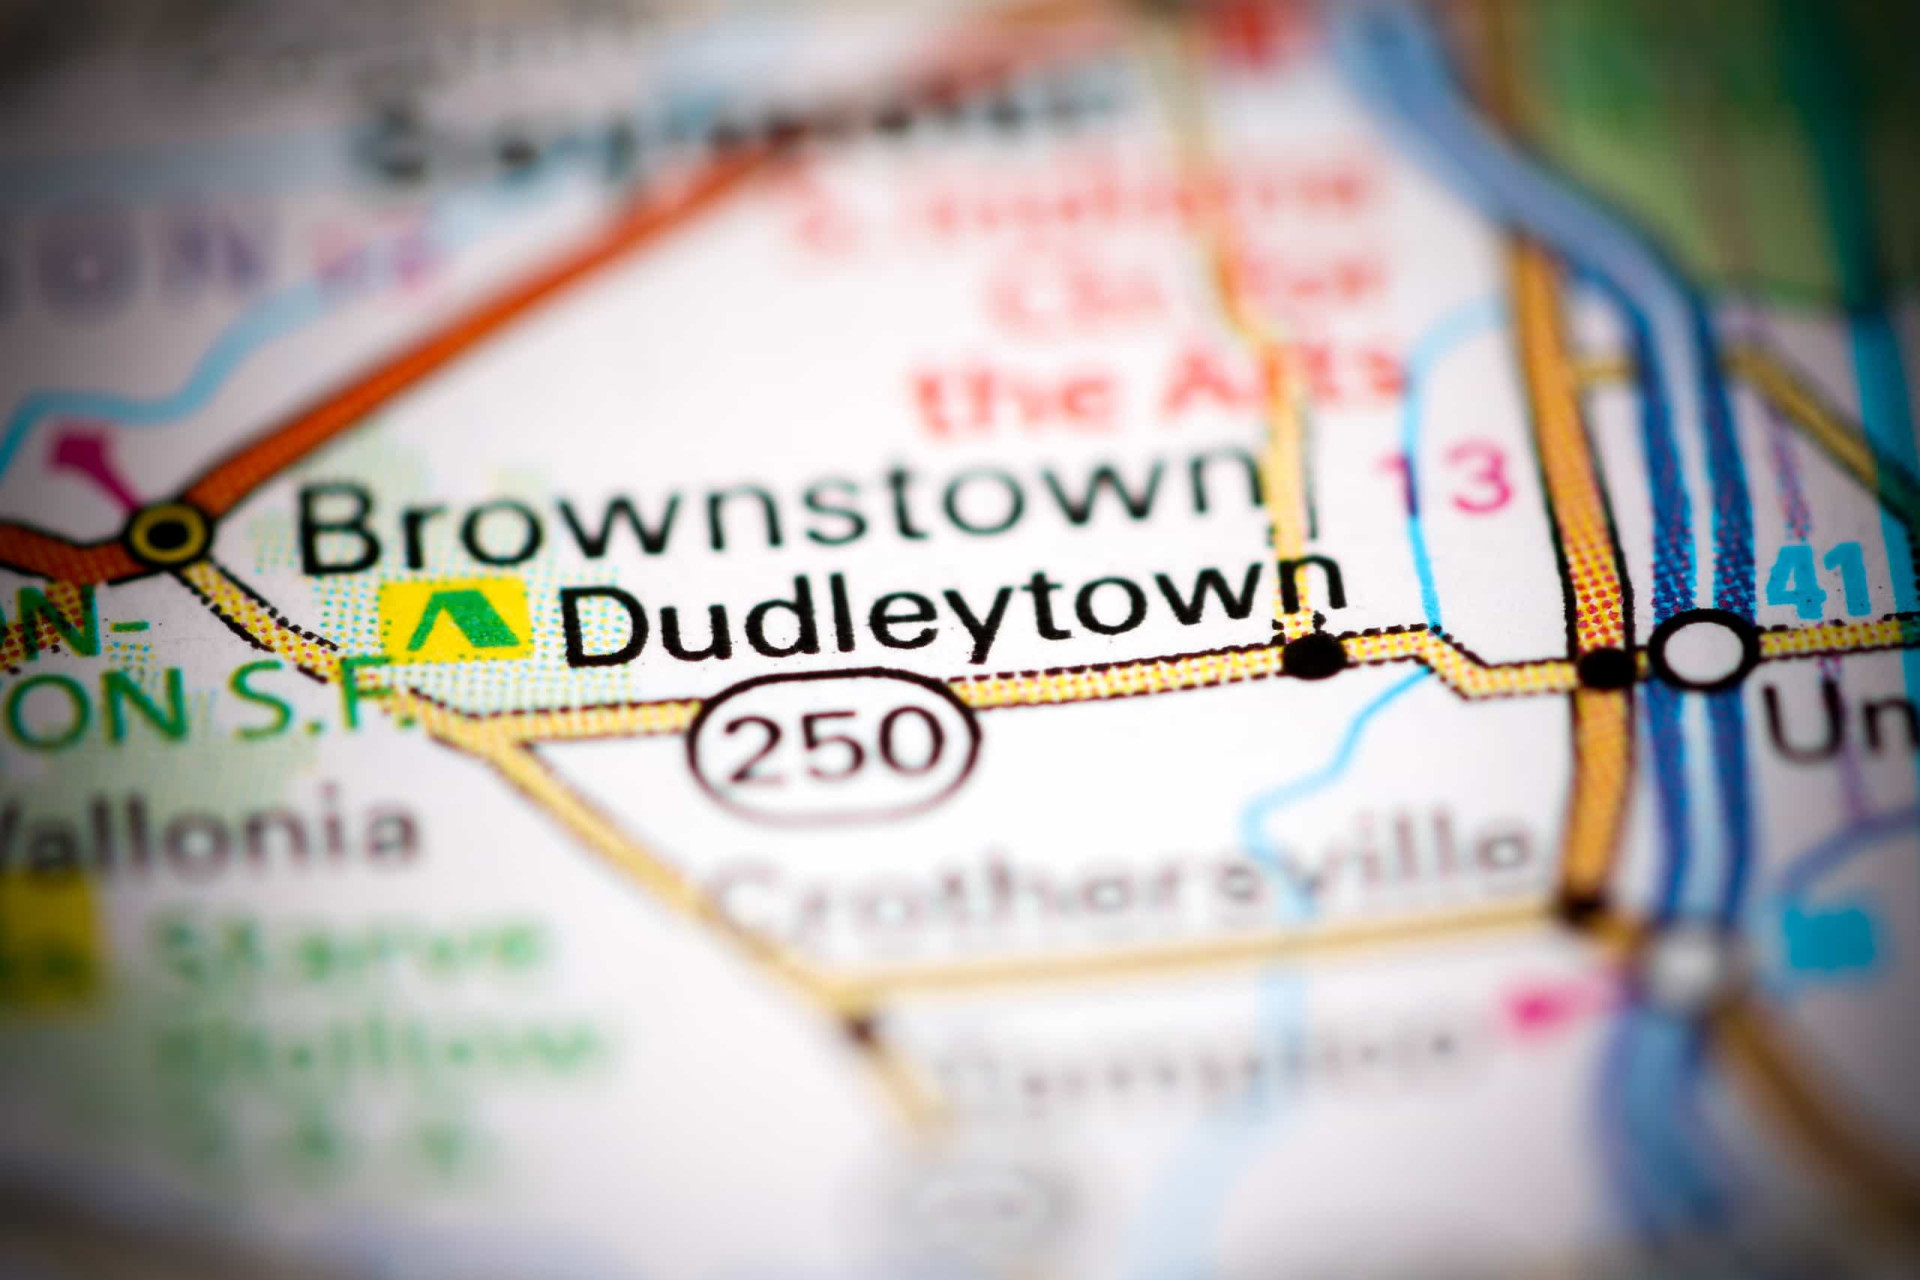 <p>Dudleytown is an abandoned old colonial village. It's haunted by numerous tragic events, including a massacre, death by epidemics, suicides, and lightning strikes. Even the woods around Dudleytown have been said to be "demonically possessed." </p>